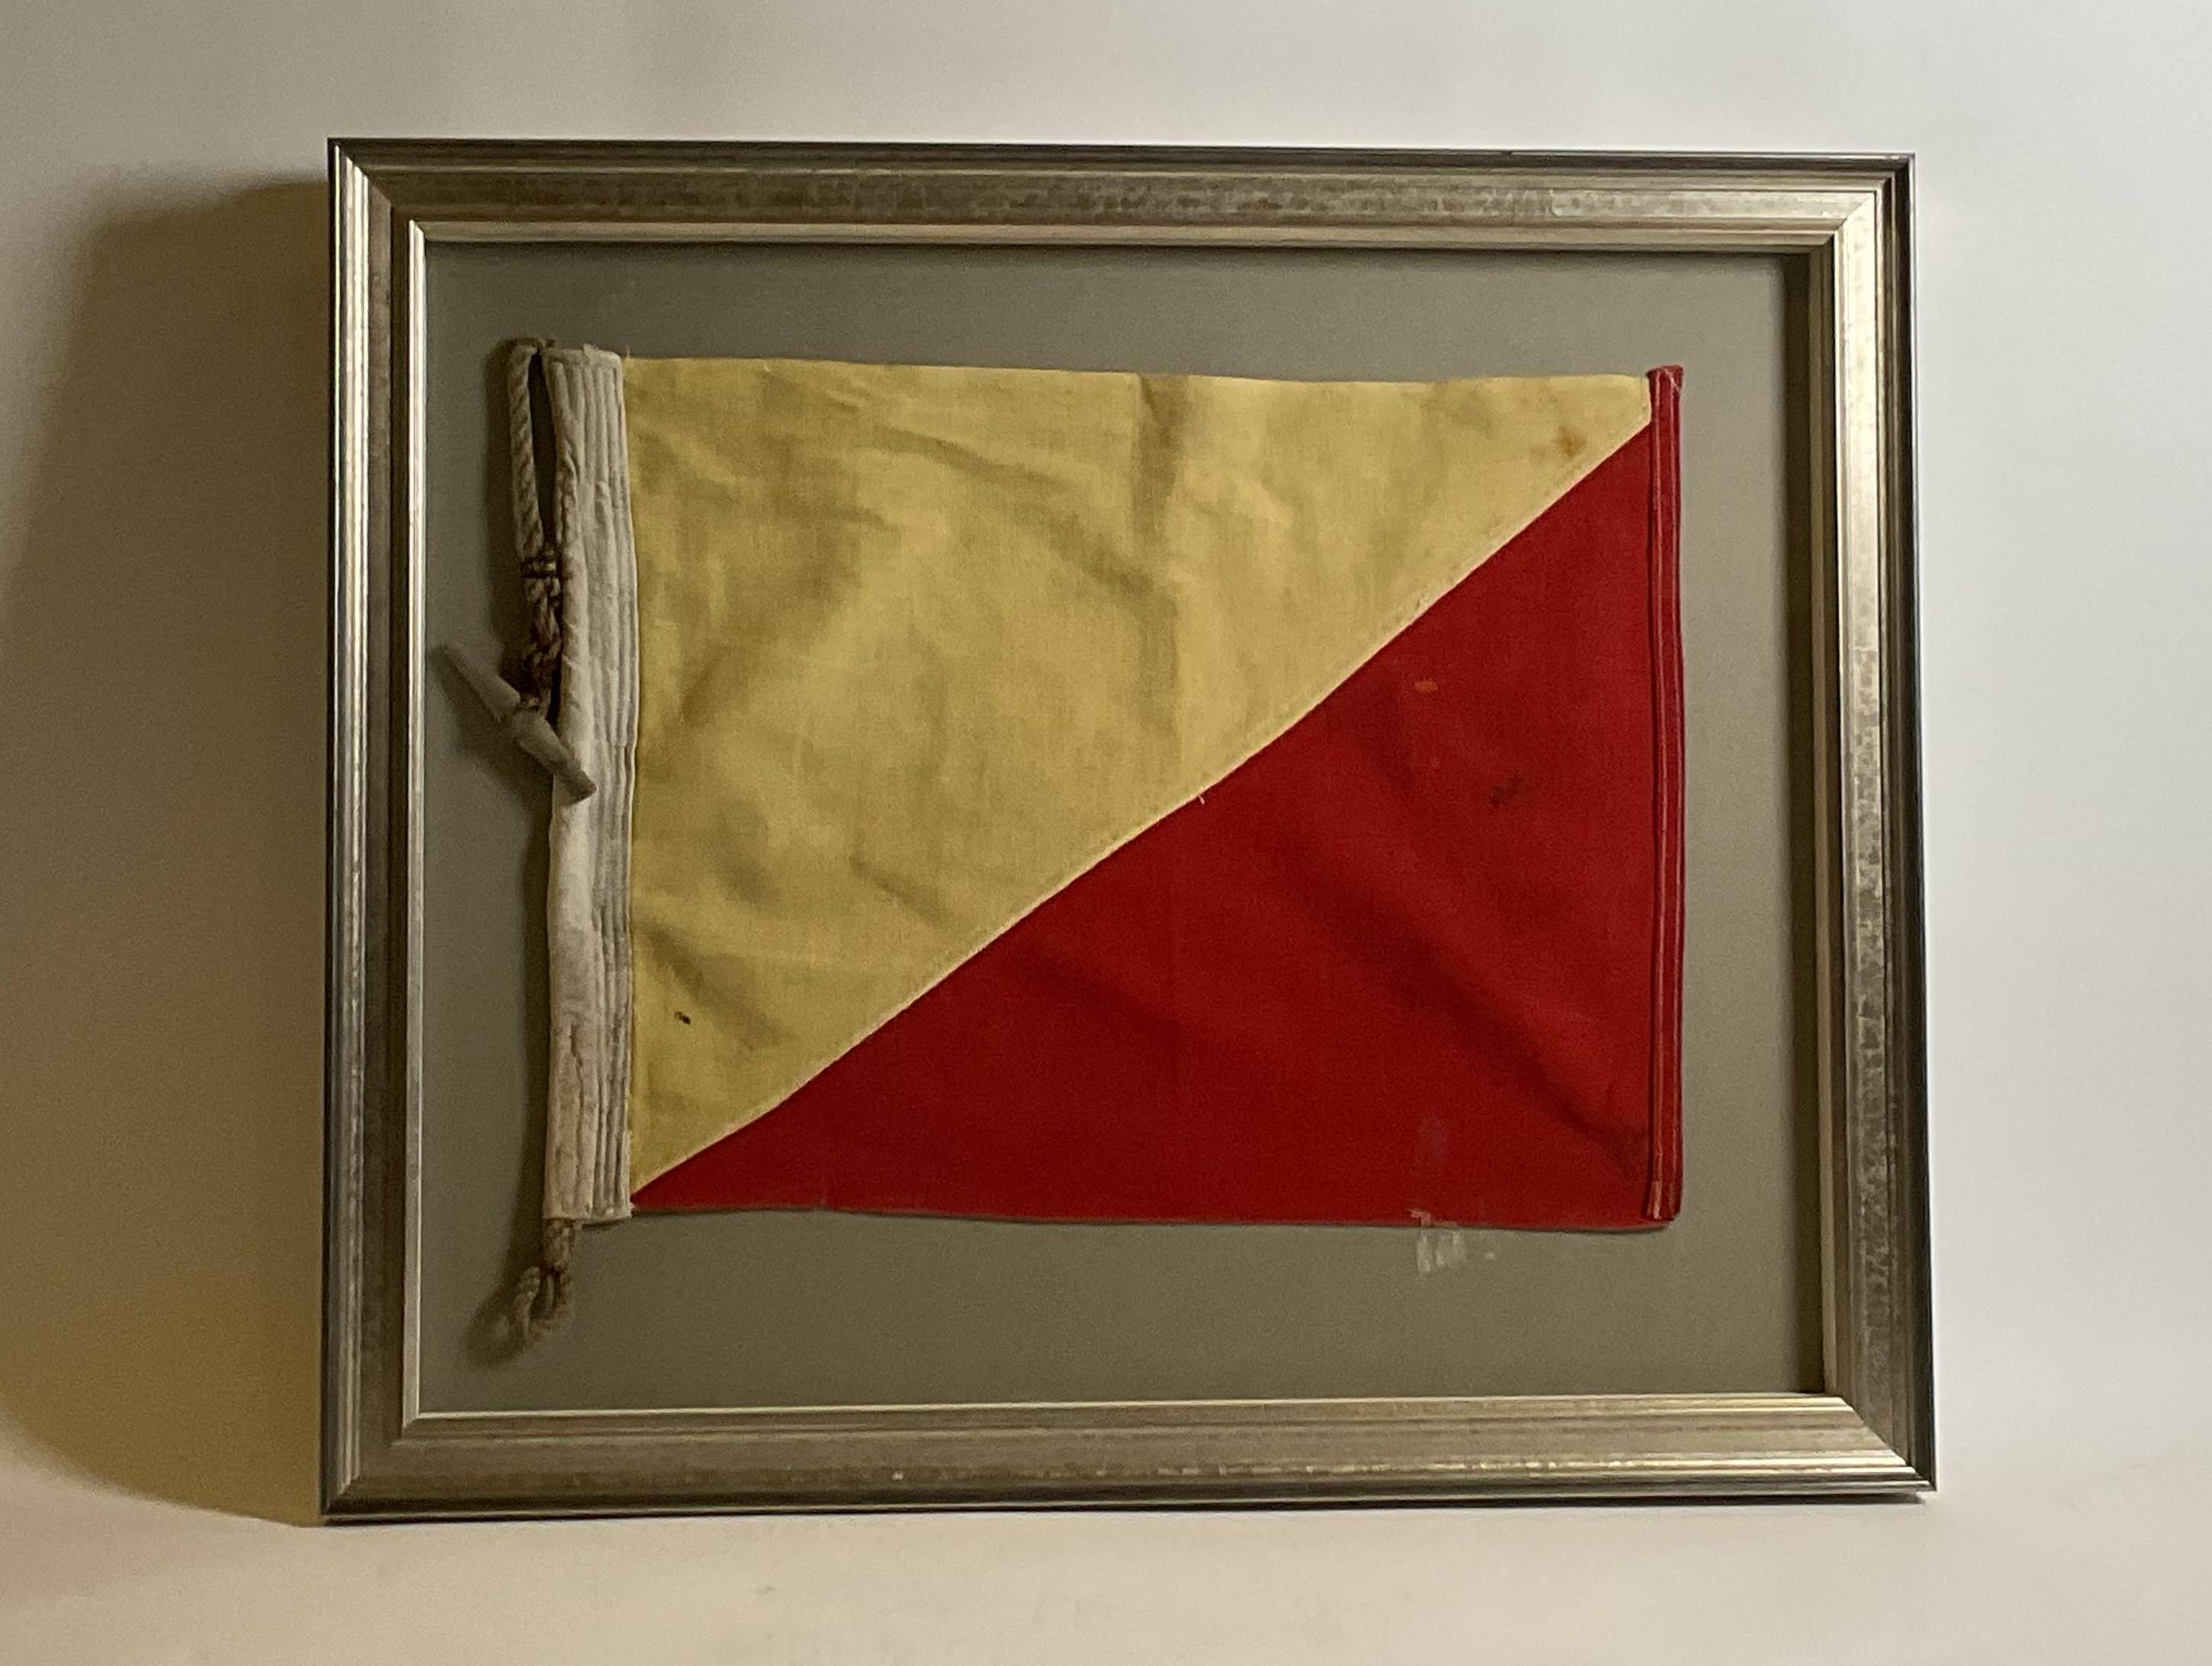 North American Vintage Nautical Signal Flag In Shadow Box Frame For Sale